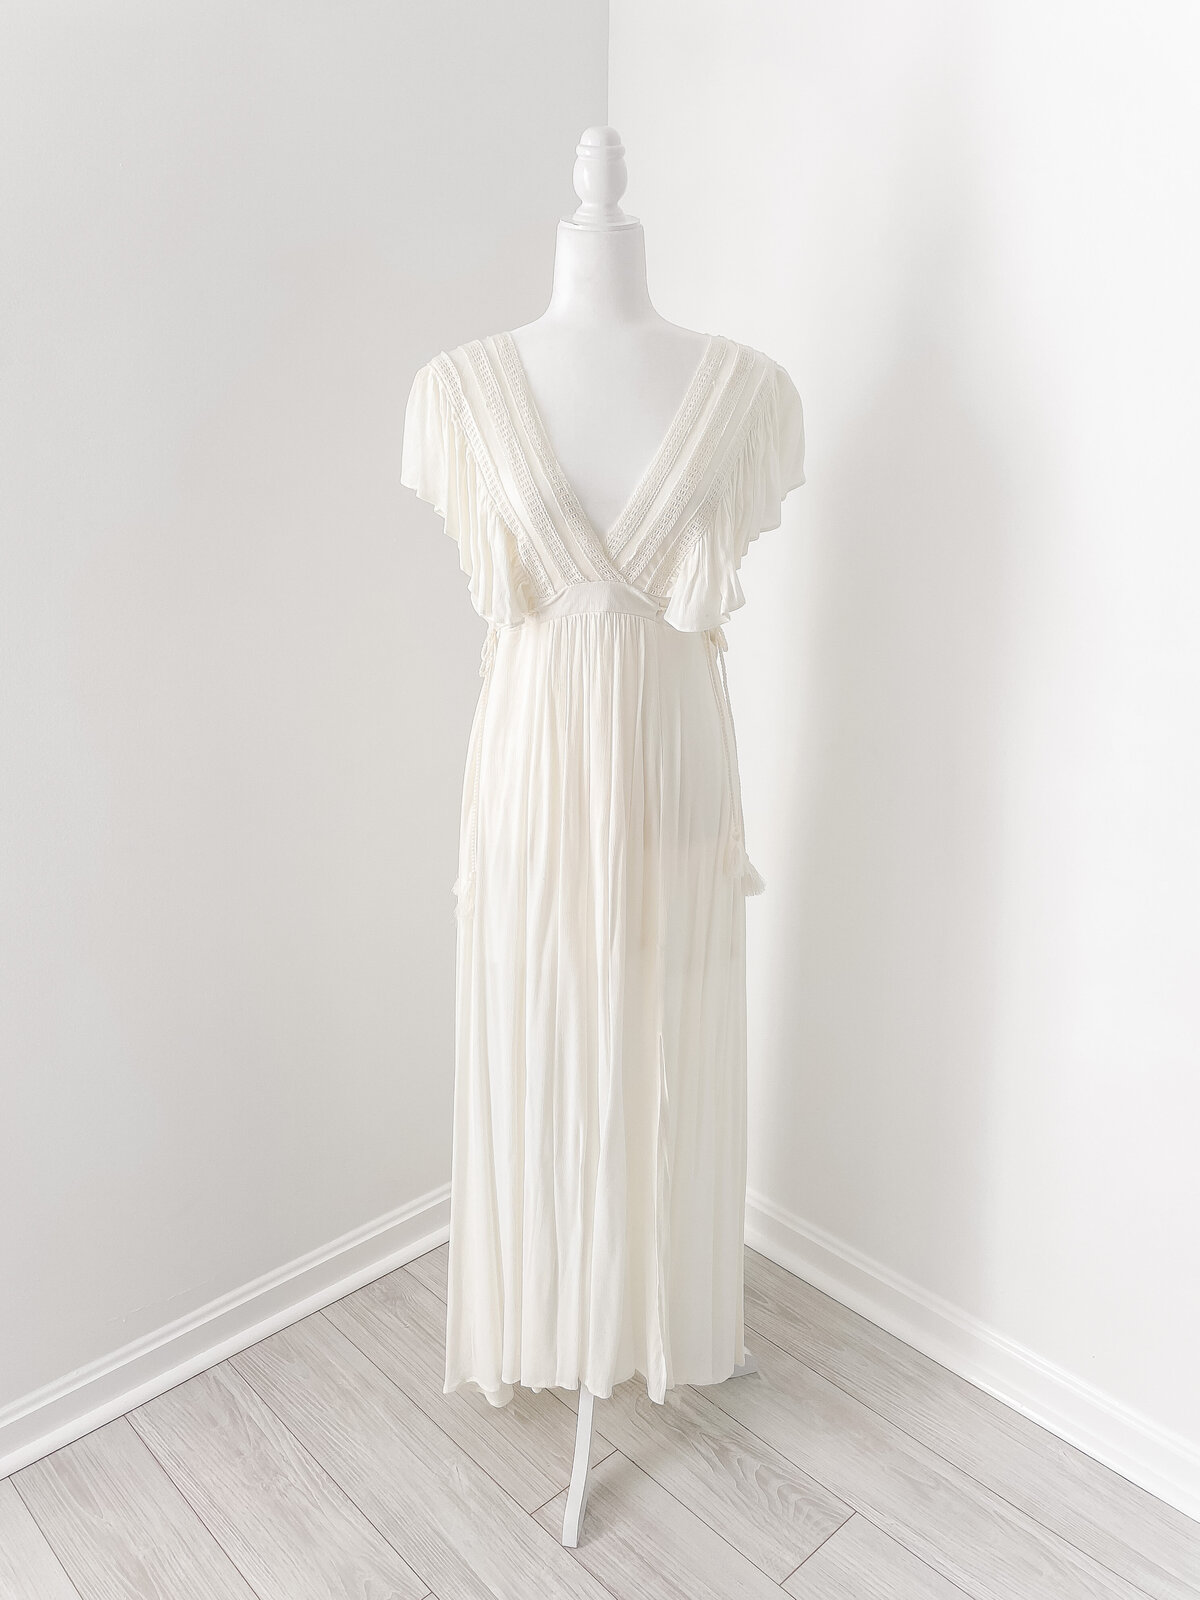 A cream midi dress with tassels and a v neck for your DC Newborn Photography photo session